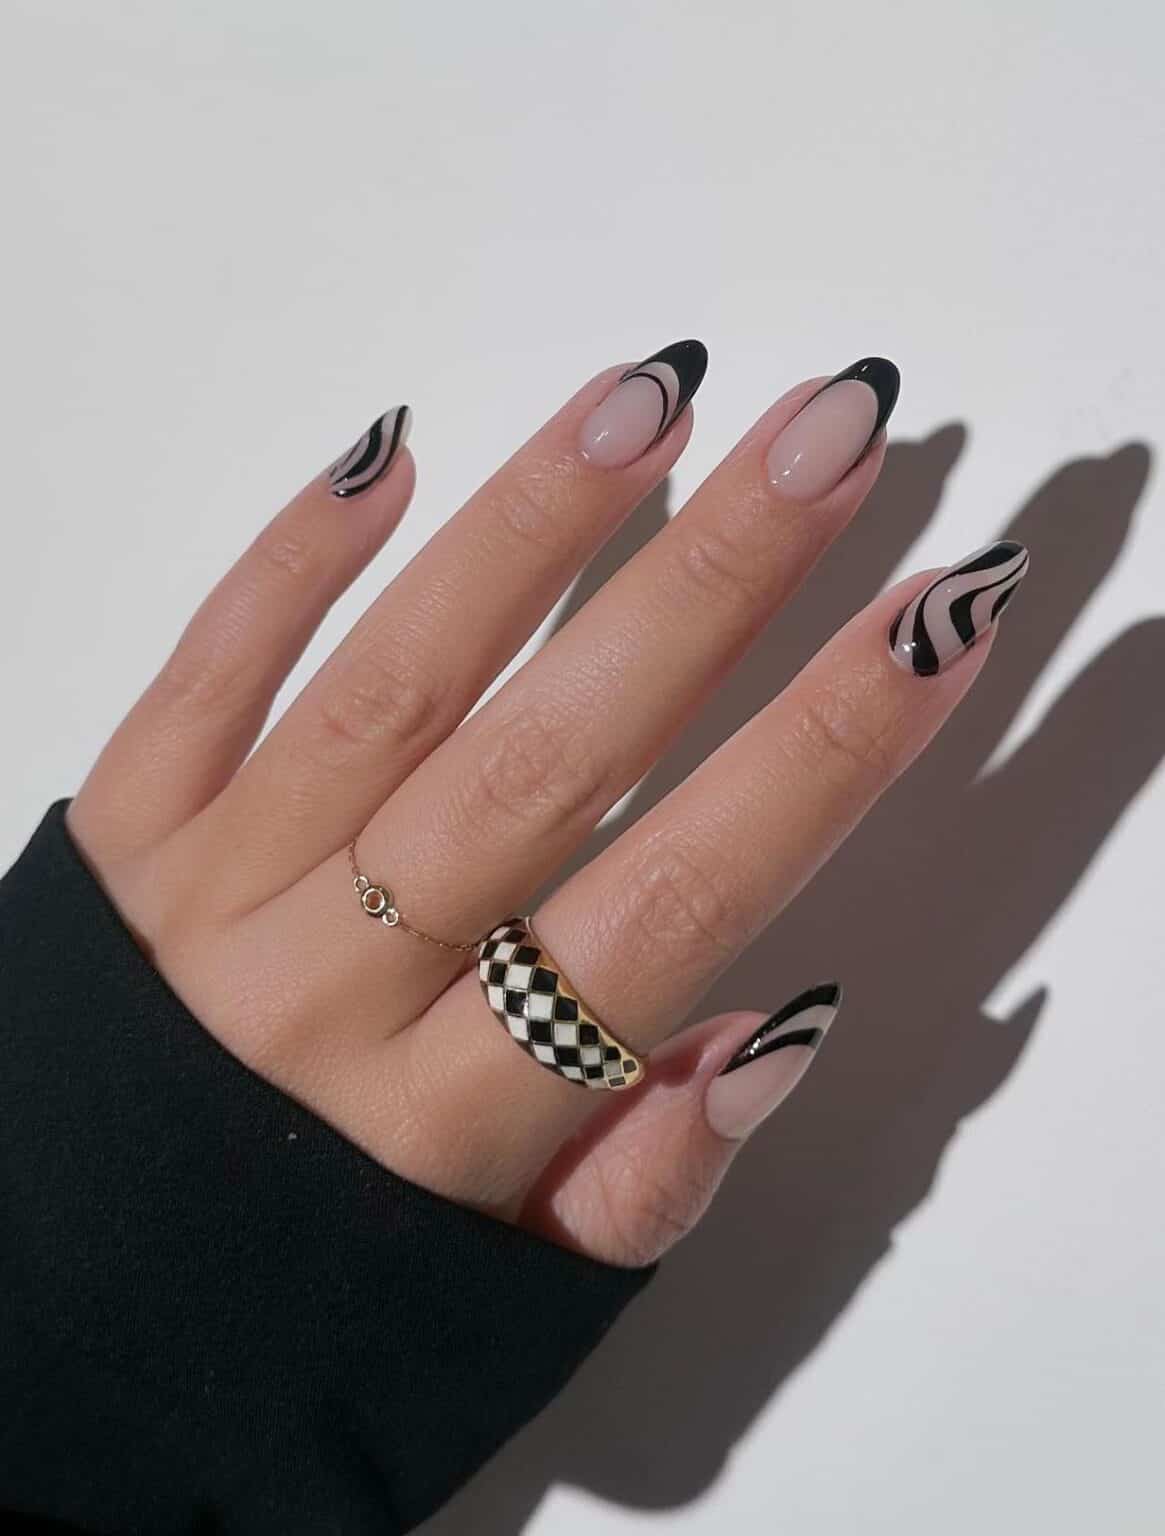 Black Nail Designs | Black Frenchies + Wave Accents